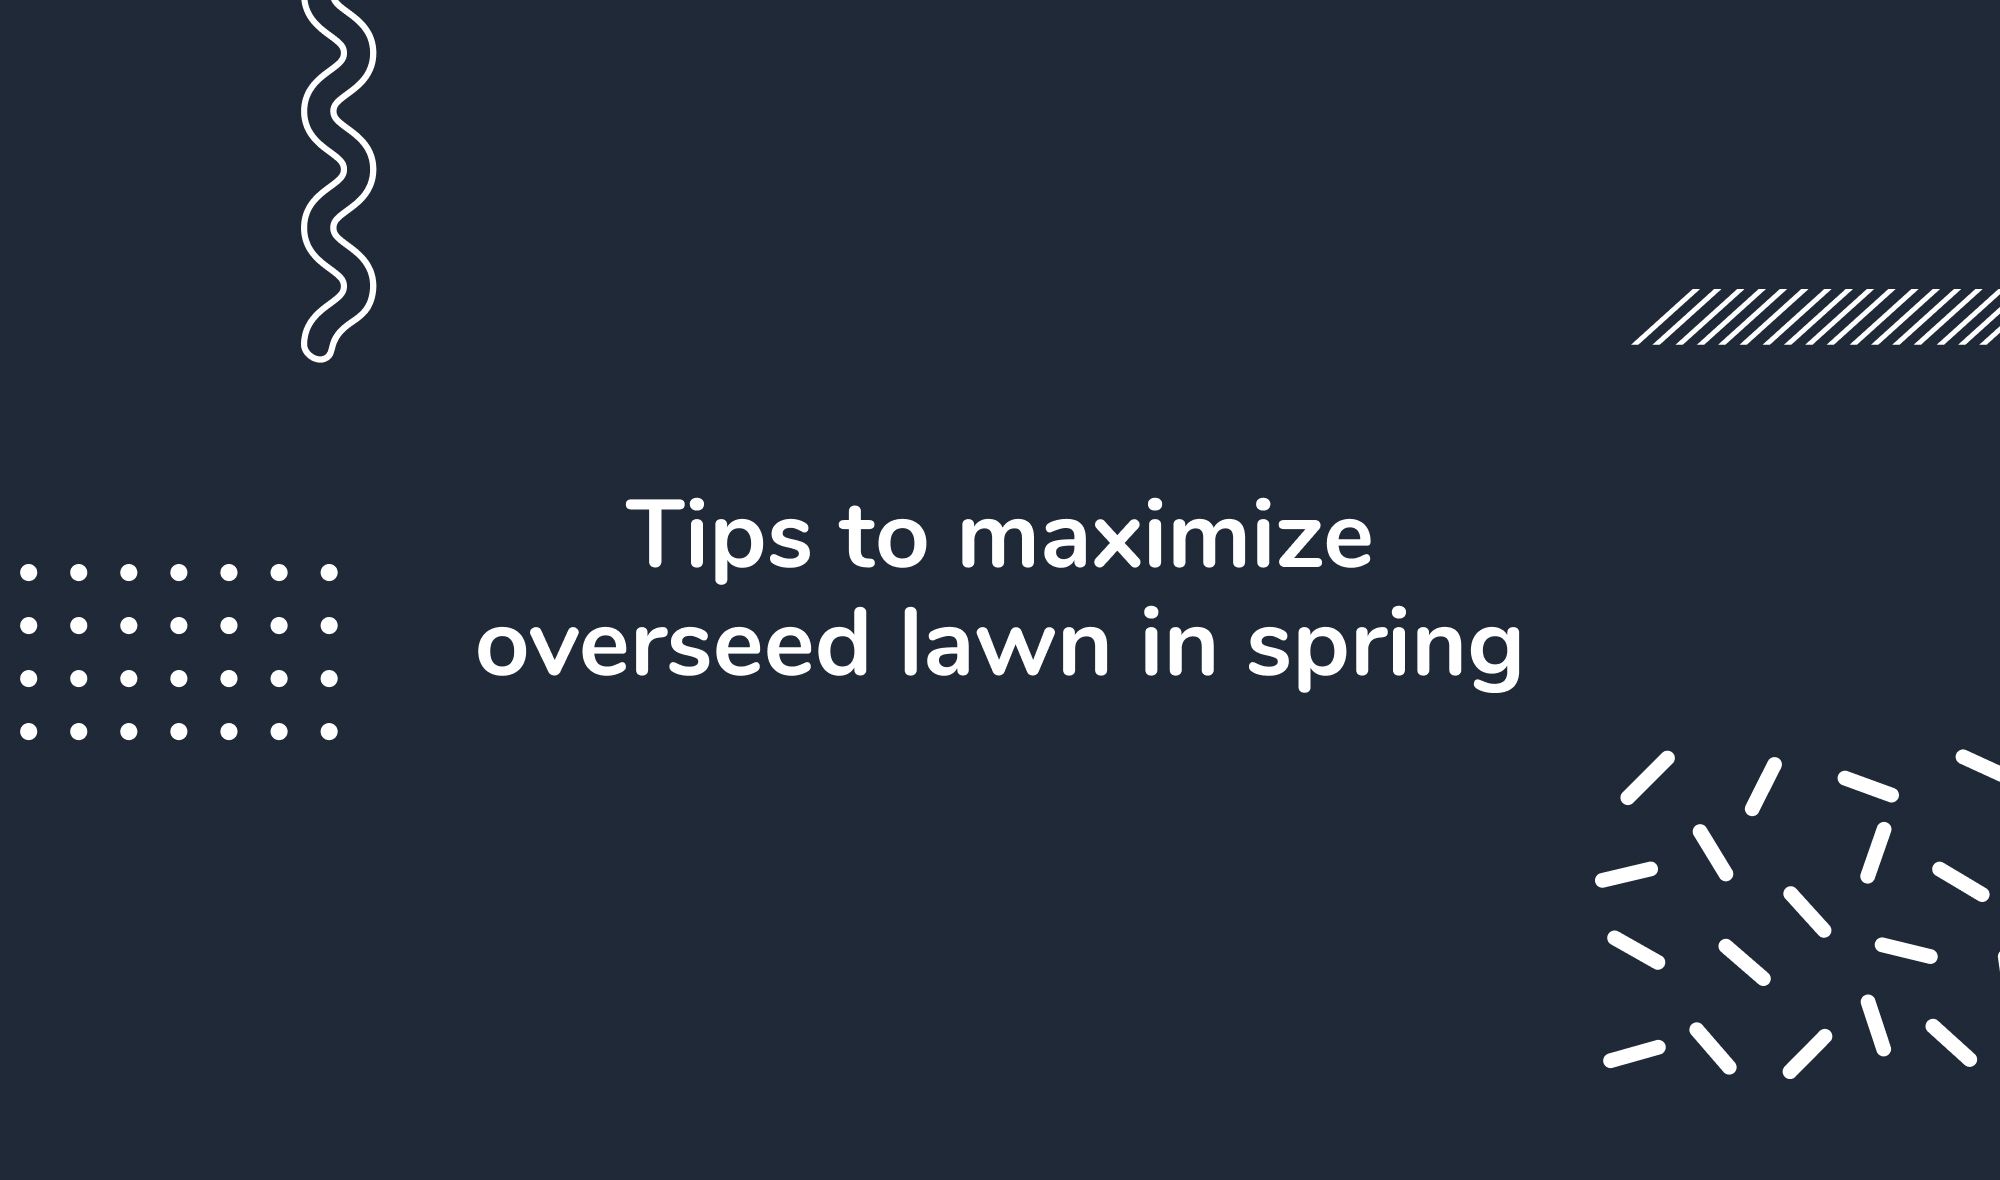 Tips to maximize overseed lawn in spring